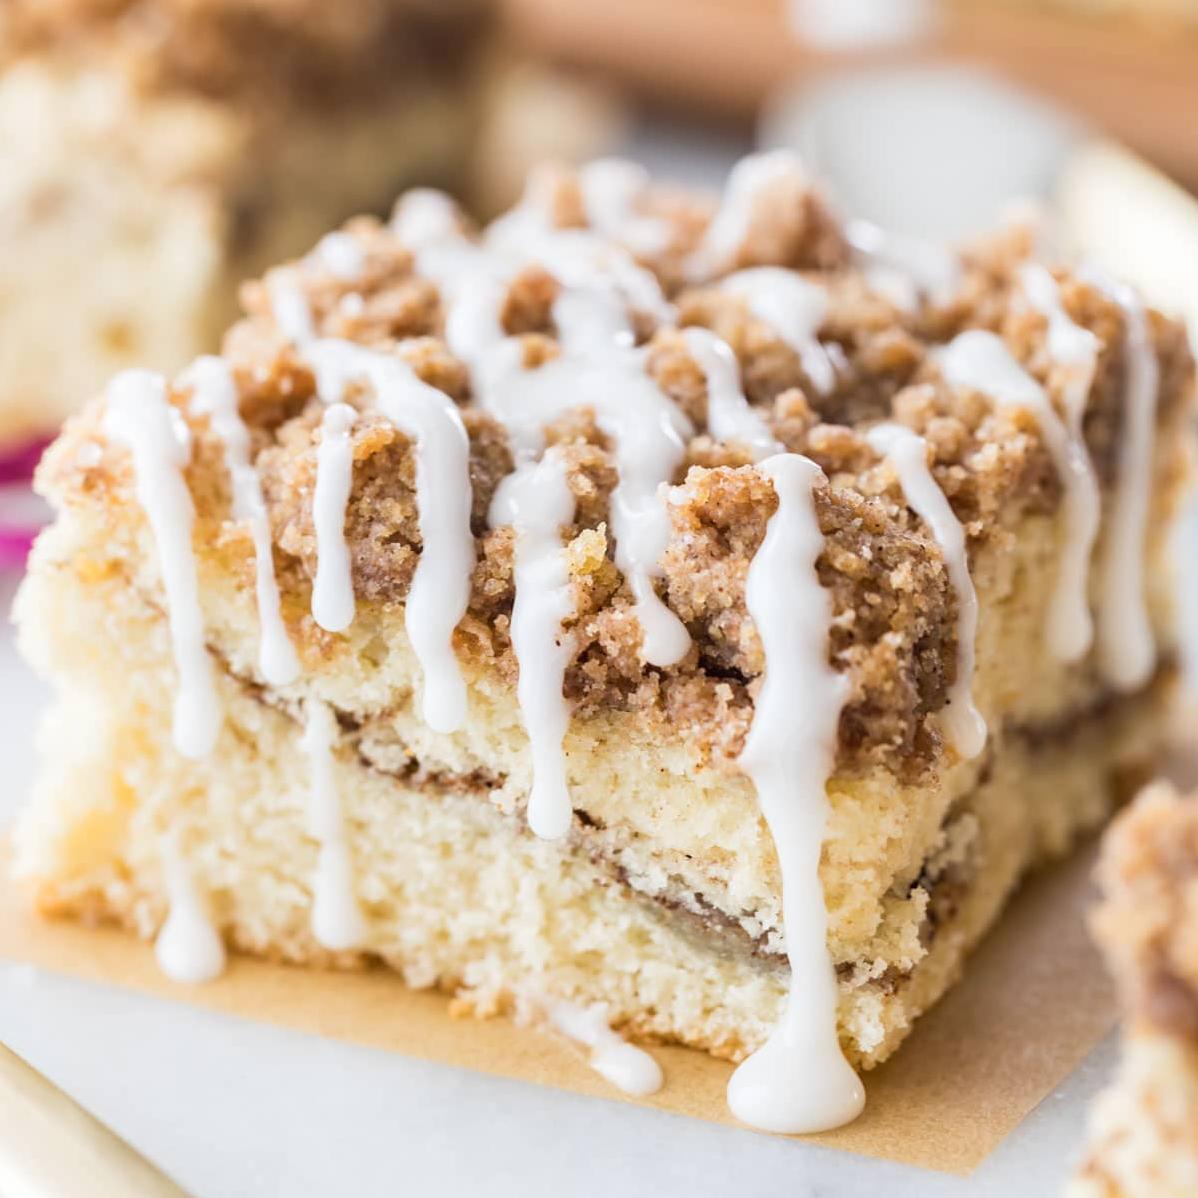  Cinnamon lovers unite! 🤝 This coffee cake is calling your name 🥰